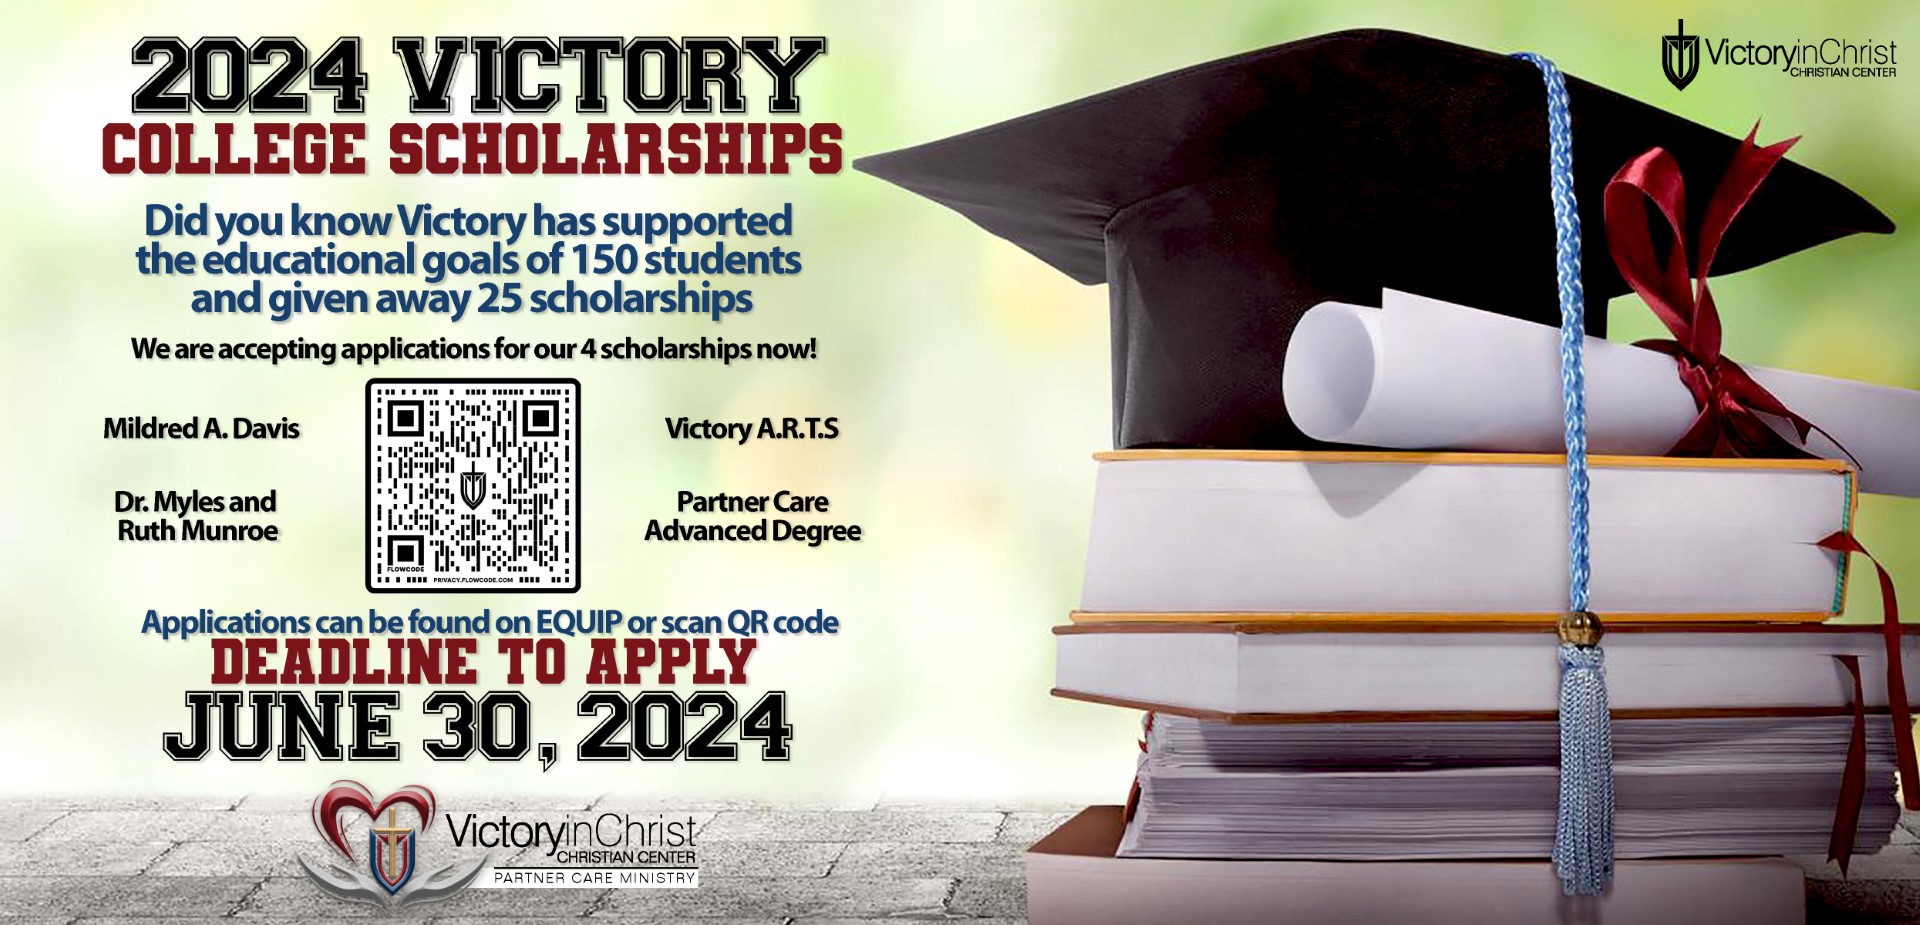 PC Victory College Scholarship 2024 image